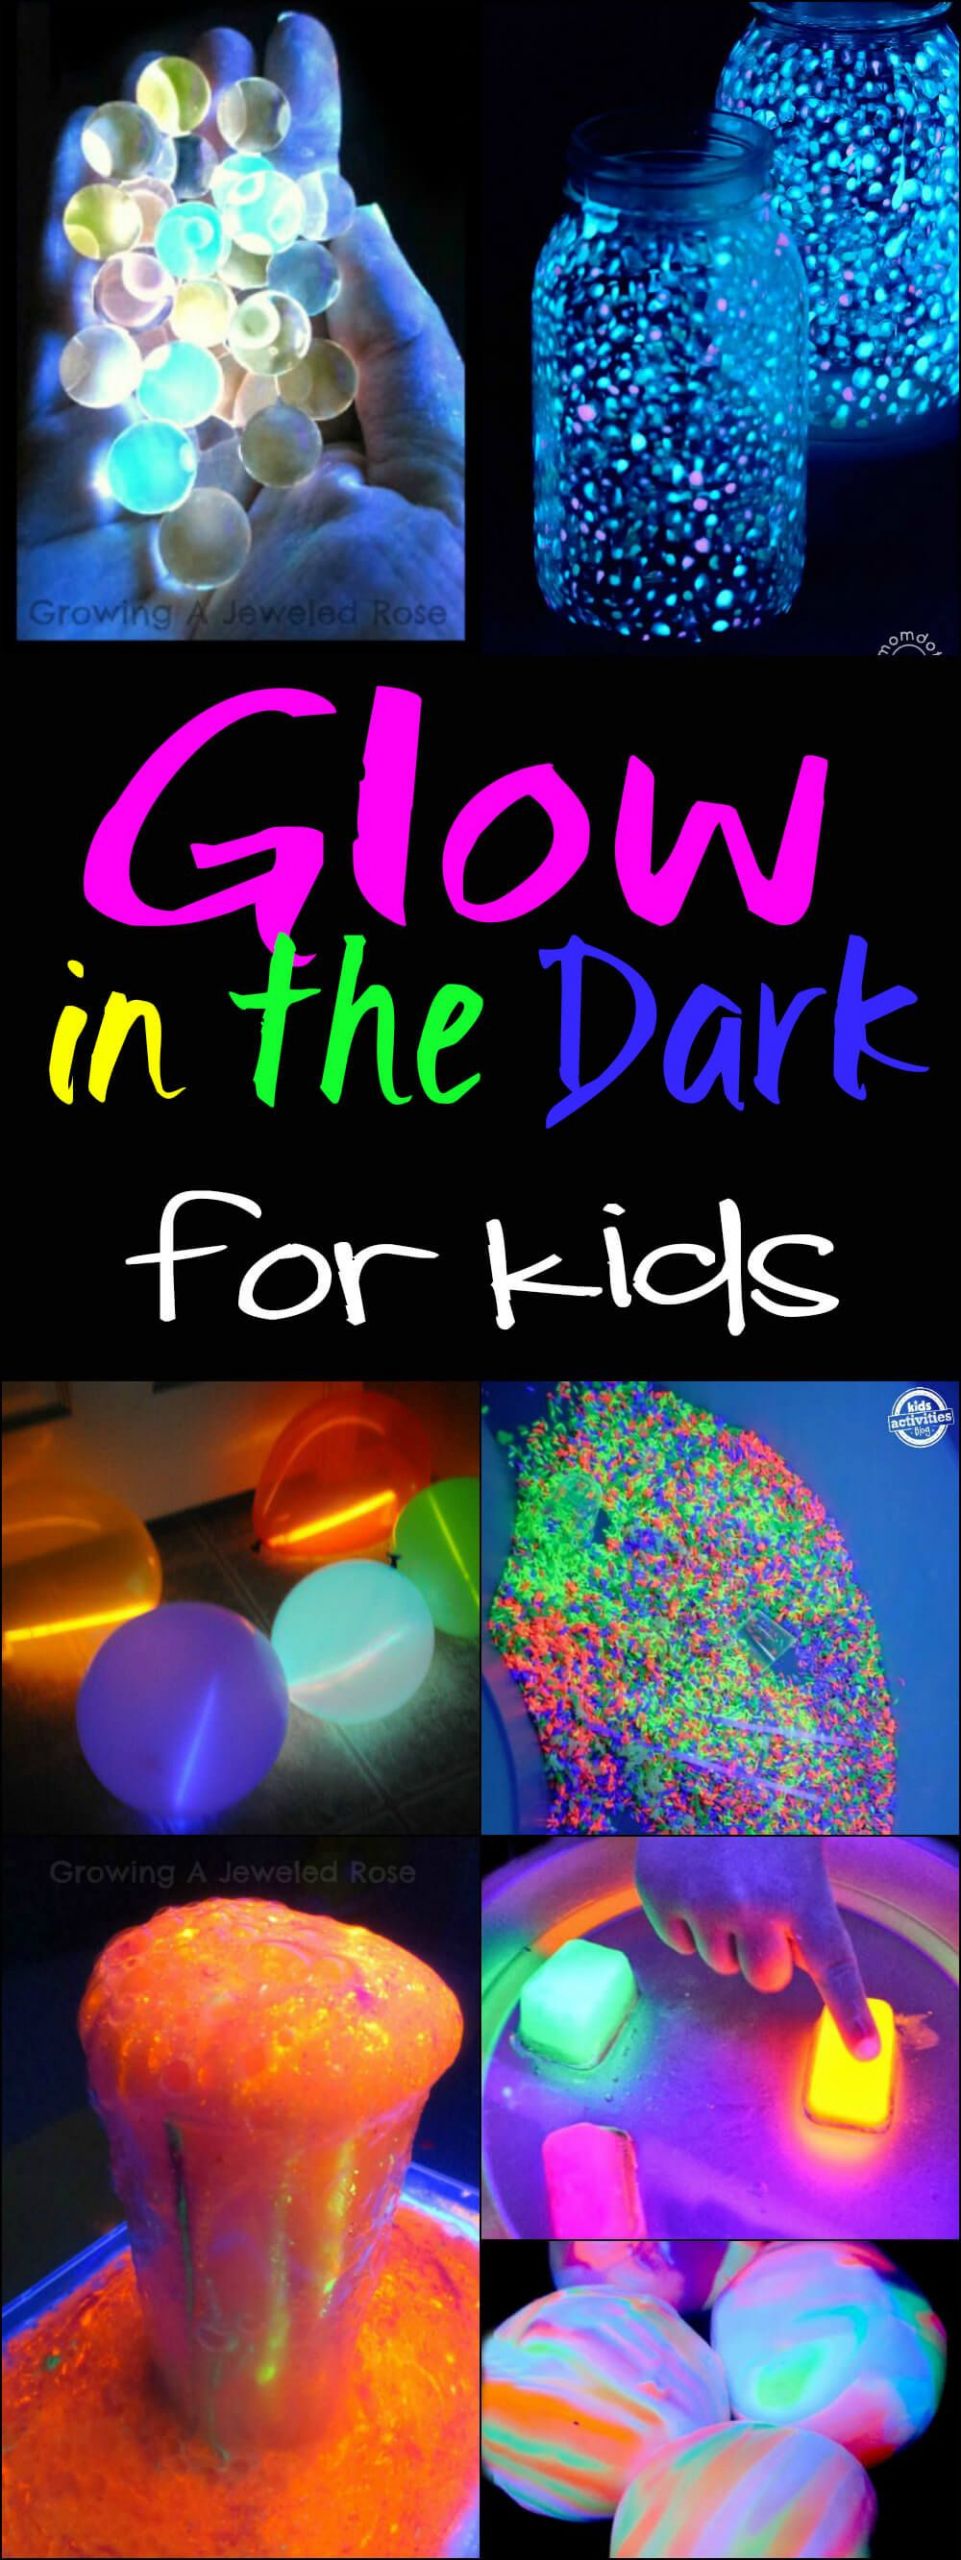 Glow Party Ideas For Kids
 Glow in the Dark Ideas for Kids Fun Crafts and Activities